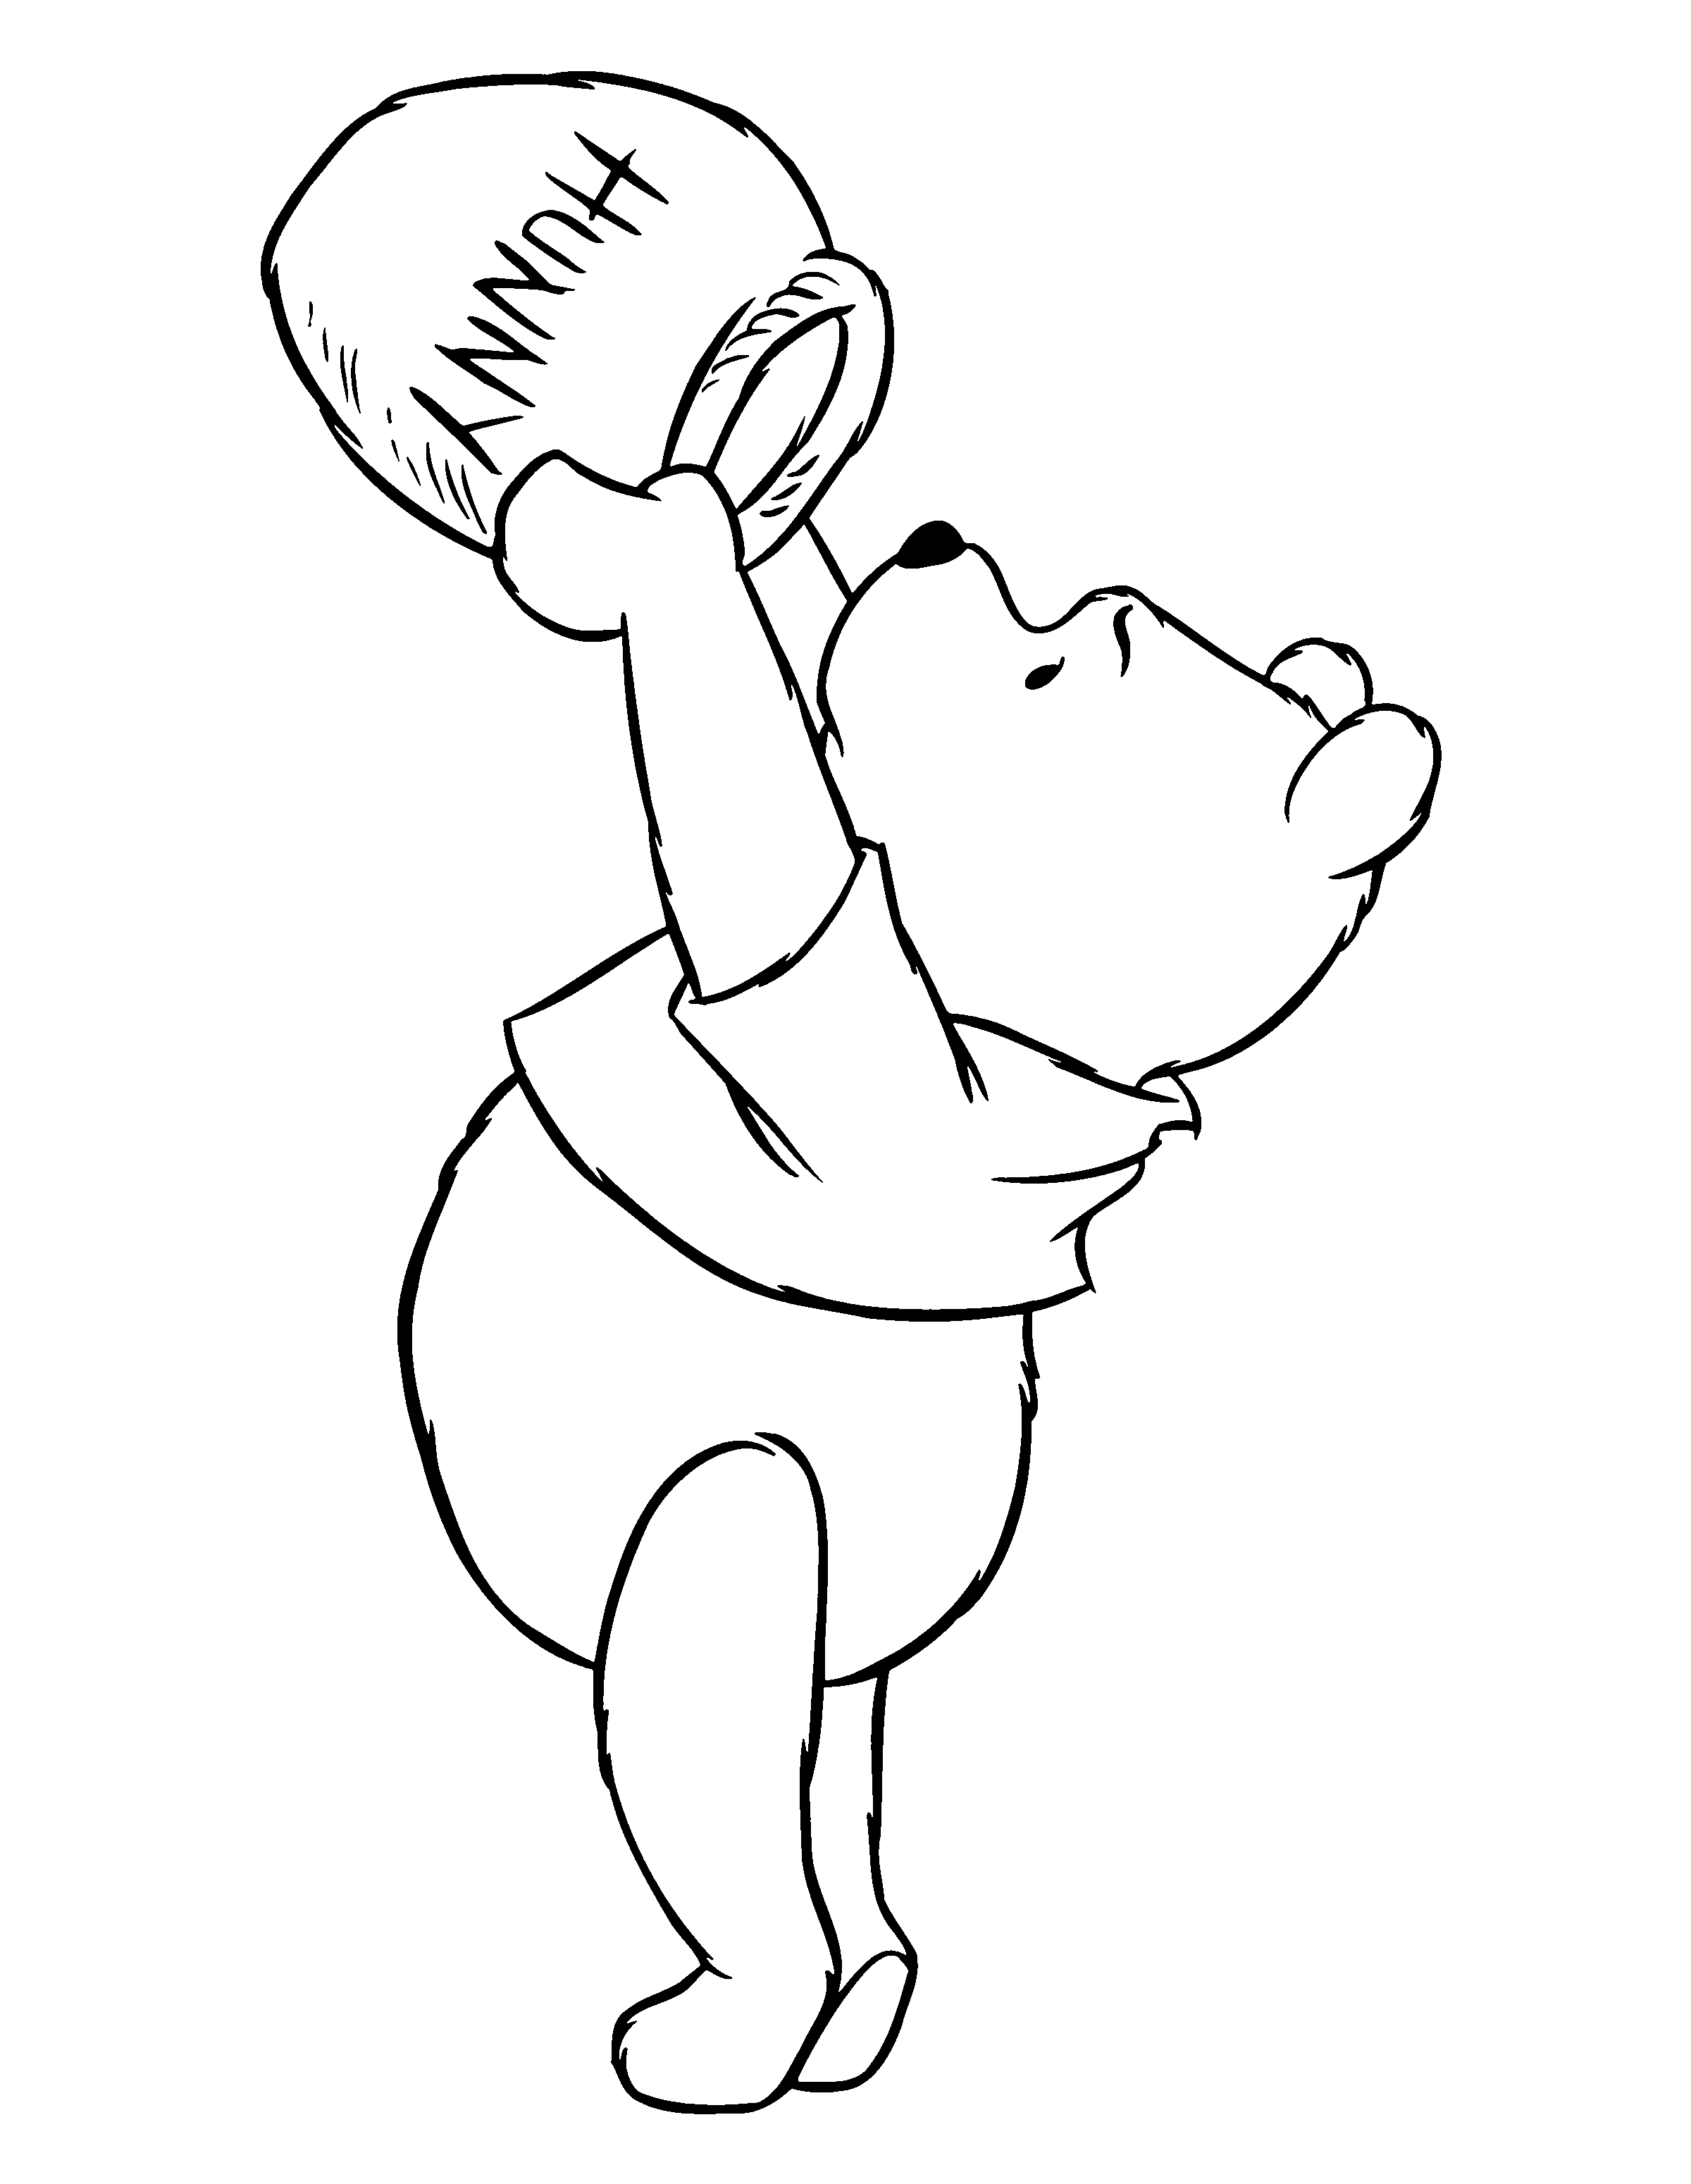 No More Honey Winnie The Pooh Coloring Pages